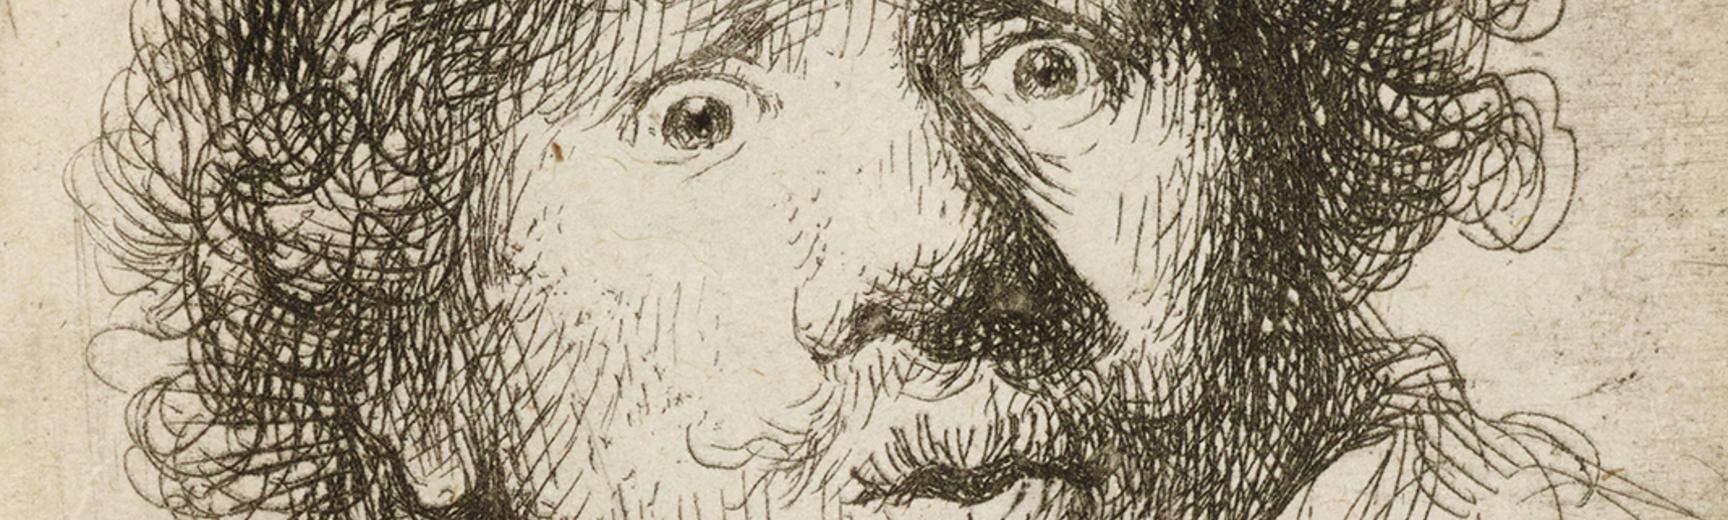 An etching of the artist Rembrandt pouting his lips with wide eyes and a furrowed brow, his expression shows surprise or fear.